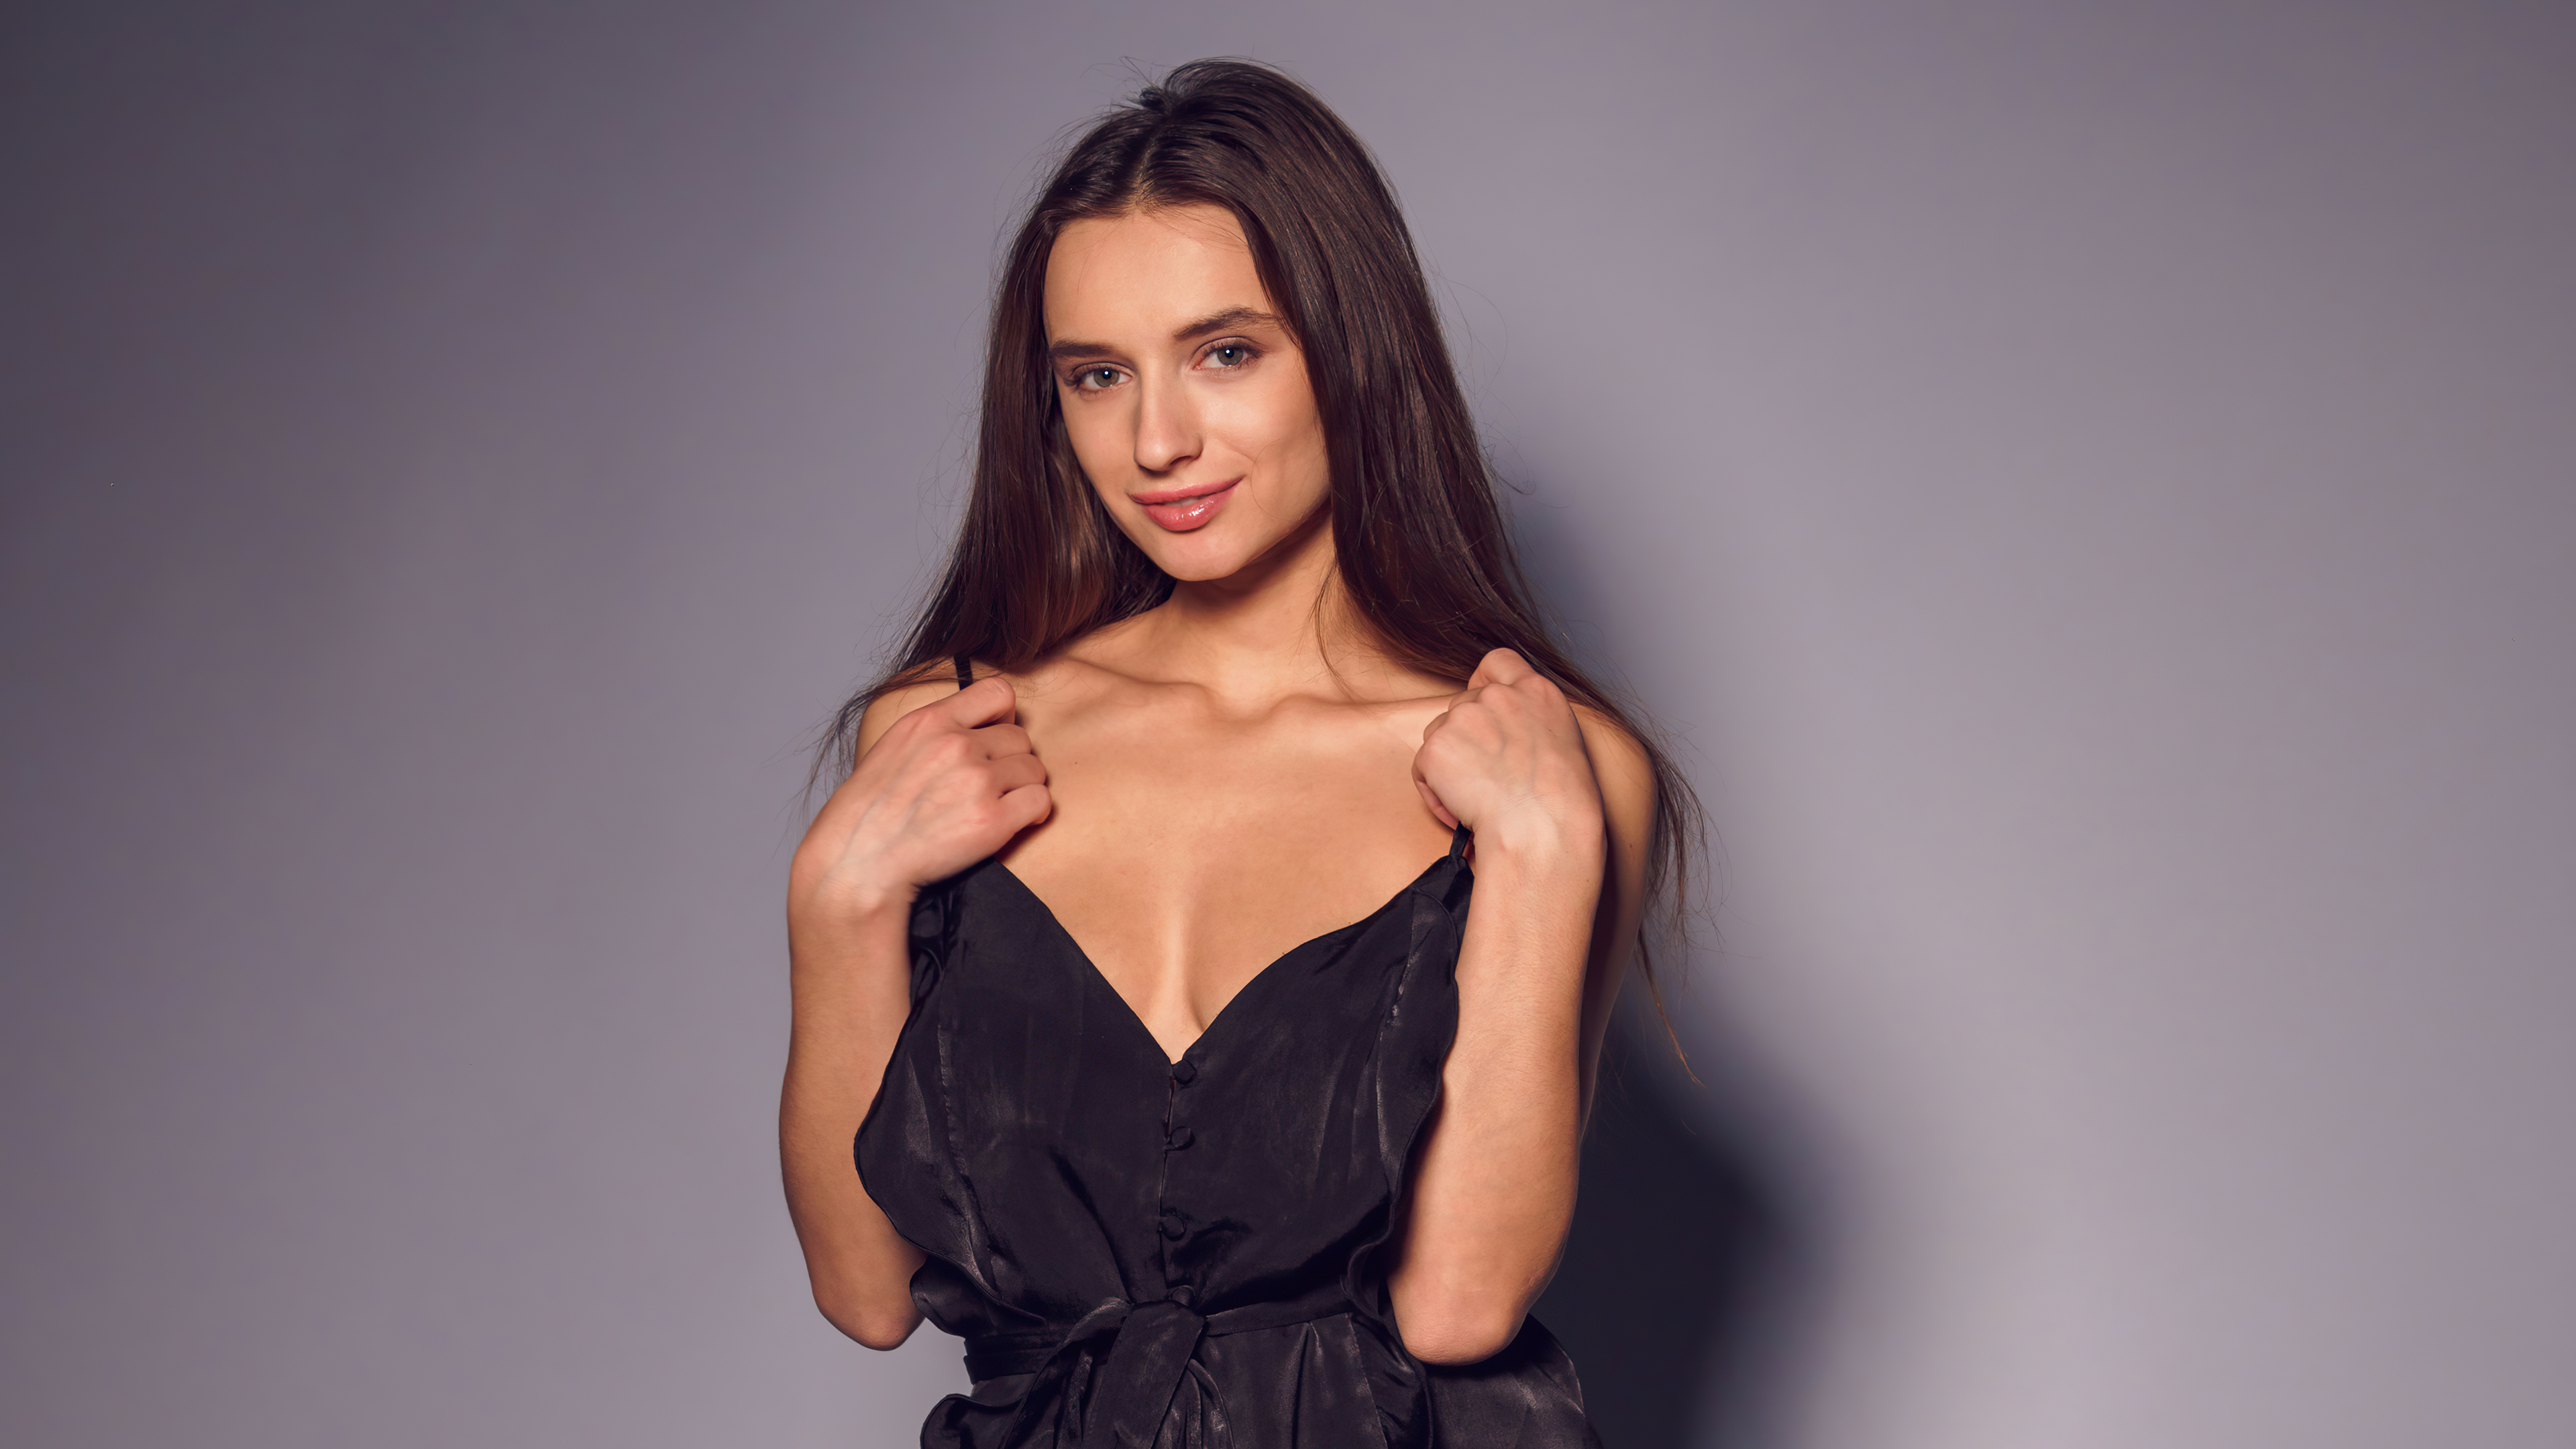 Free photo Portrait of a brown-haired woman in a black dress